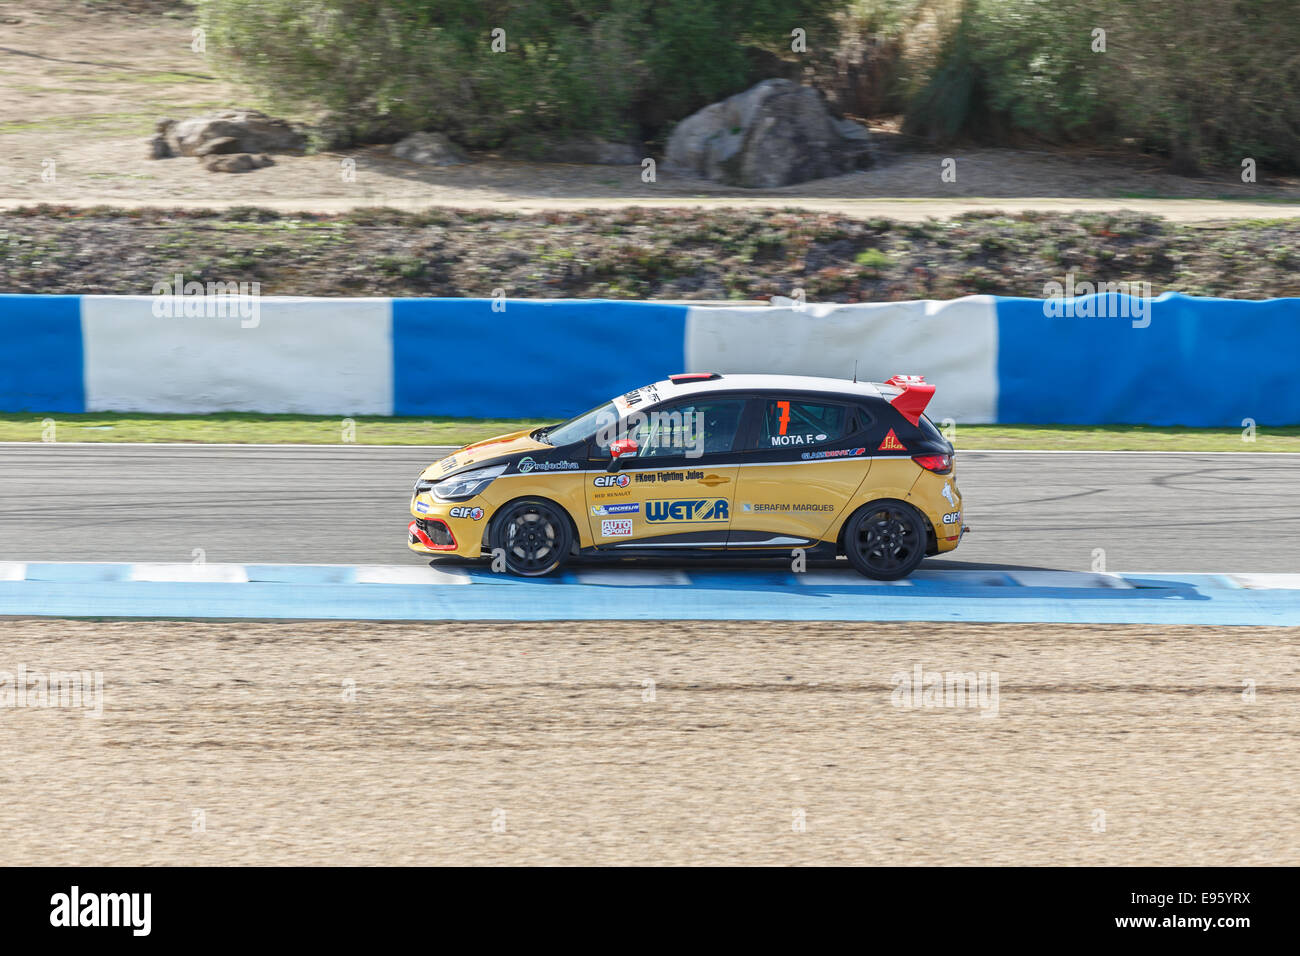 Fabio Mota of Lema Racing Team  drives his car during qualifying session at Jerez racetrack Stock Photo